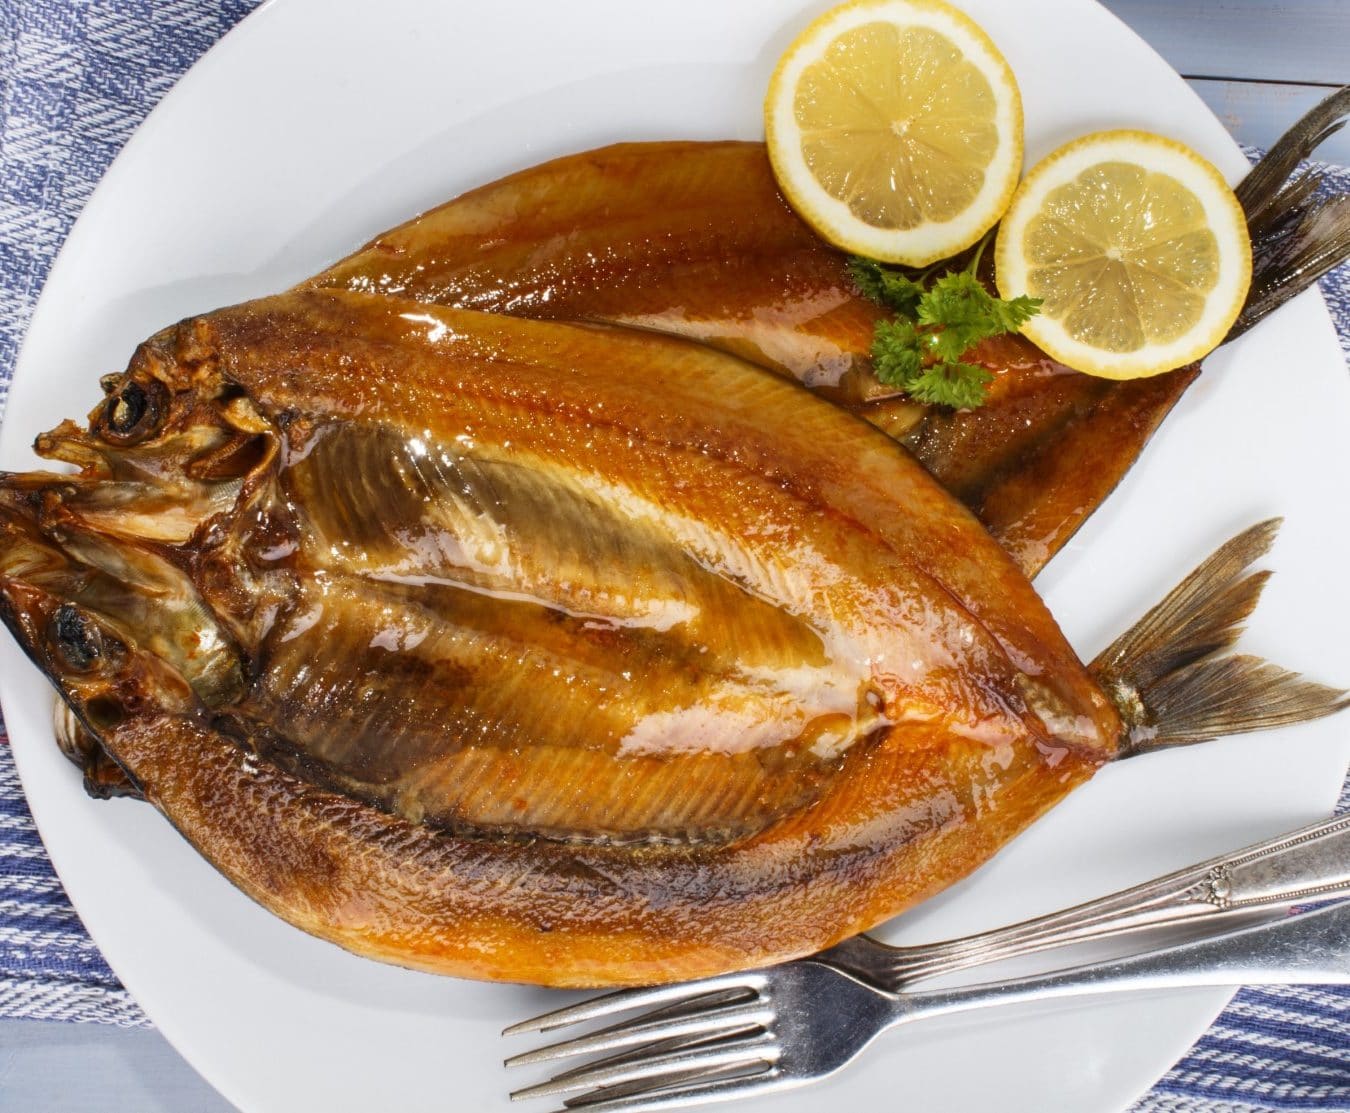 Buy Oak Smoked Kippers 300-400g Online at the Best Price, Free UK